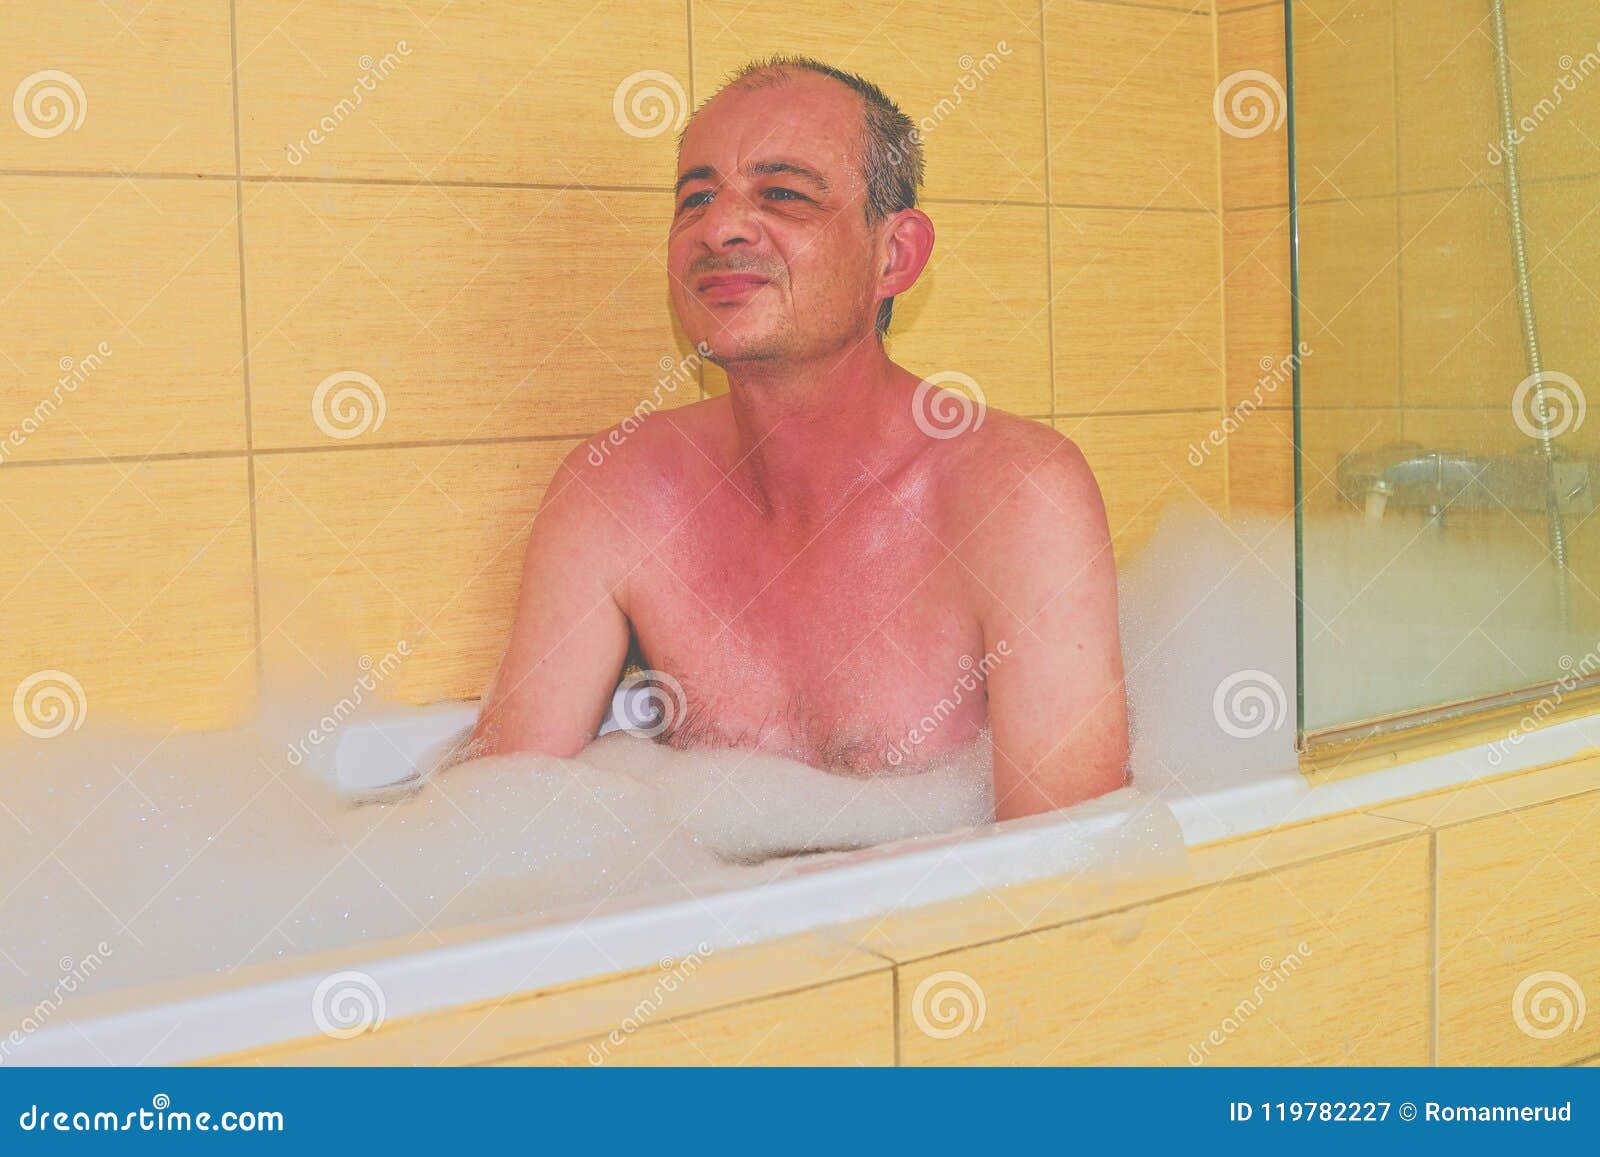 Man Having A Bath Middle Aged Man Is Relaxing In The Bath Full Of